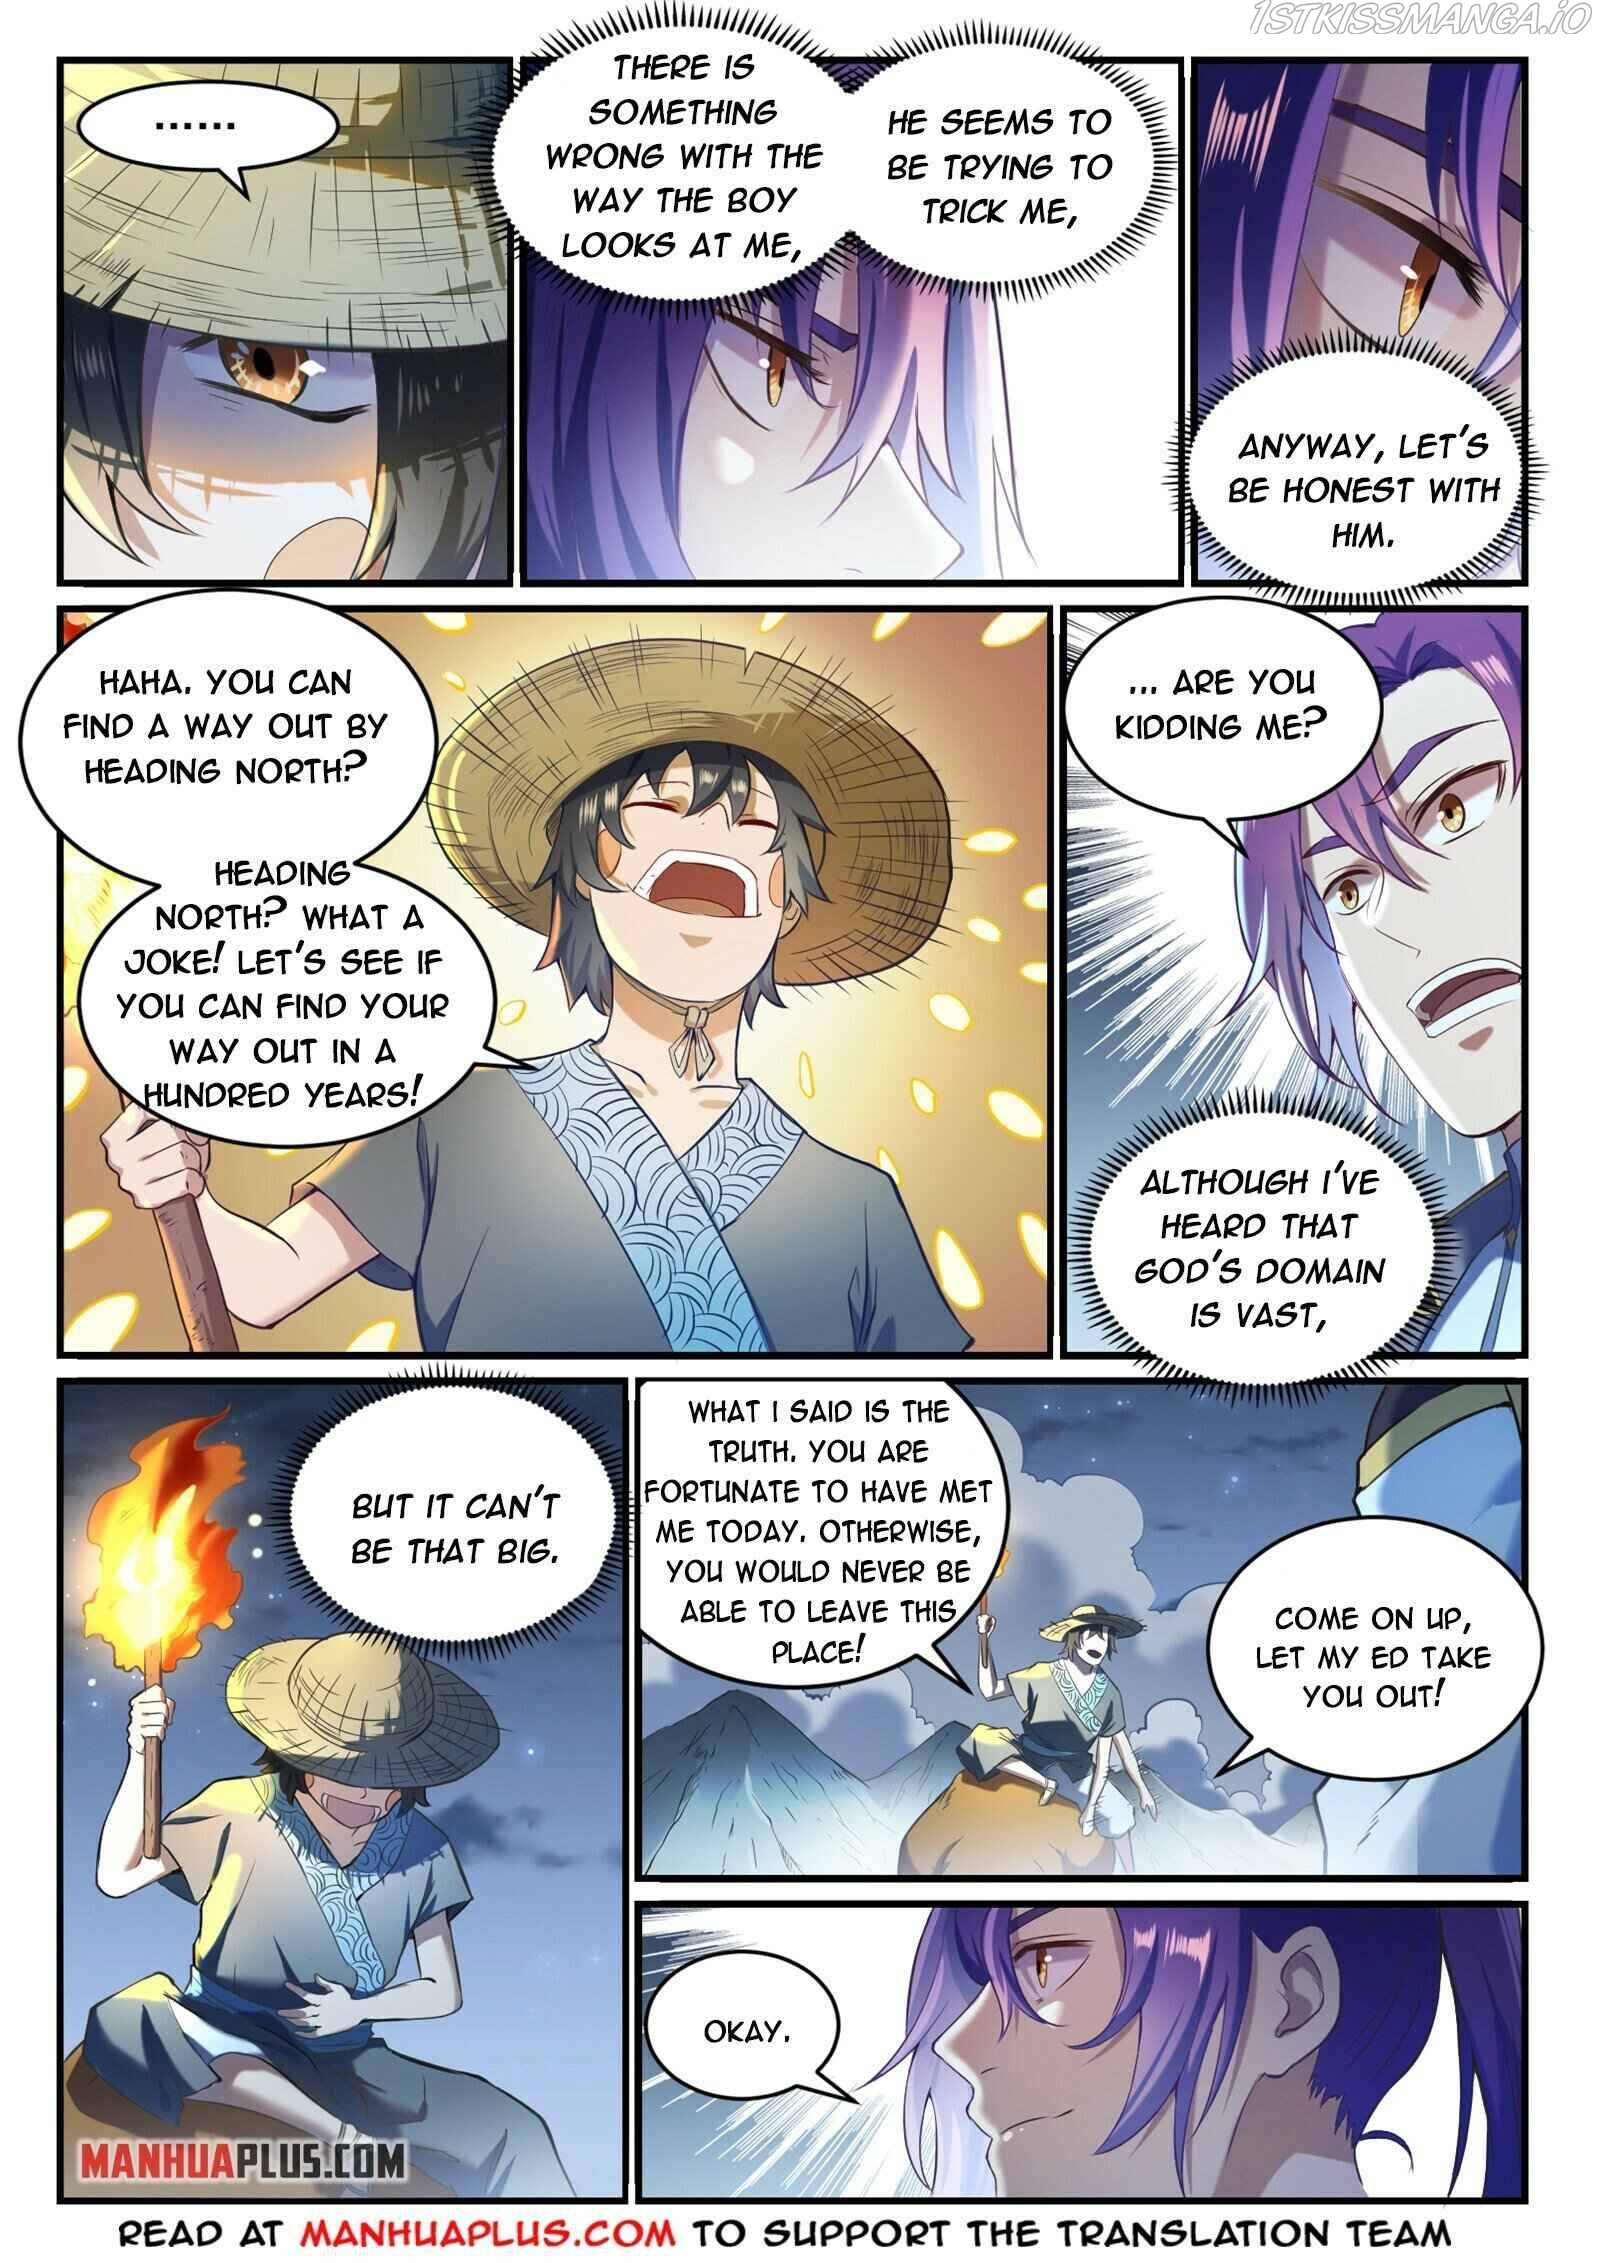 Apotheosis Chapter 843 - Page 1